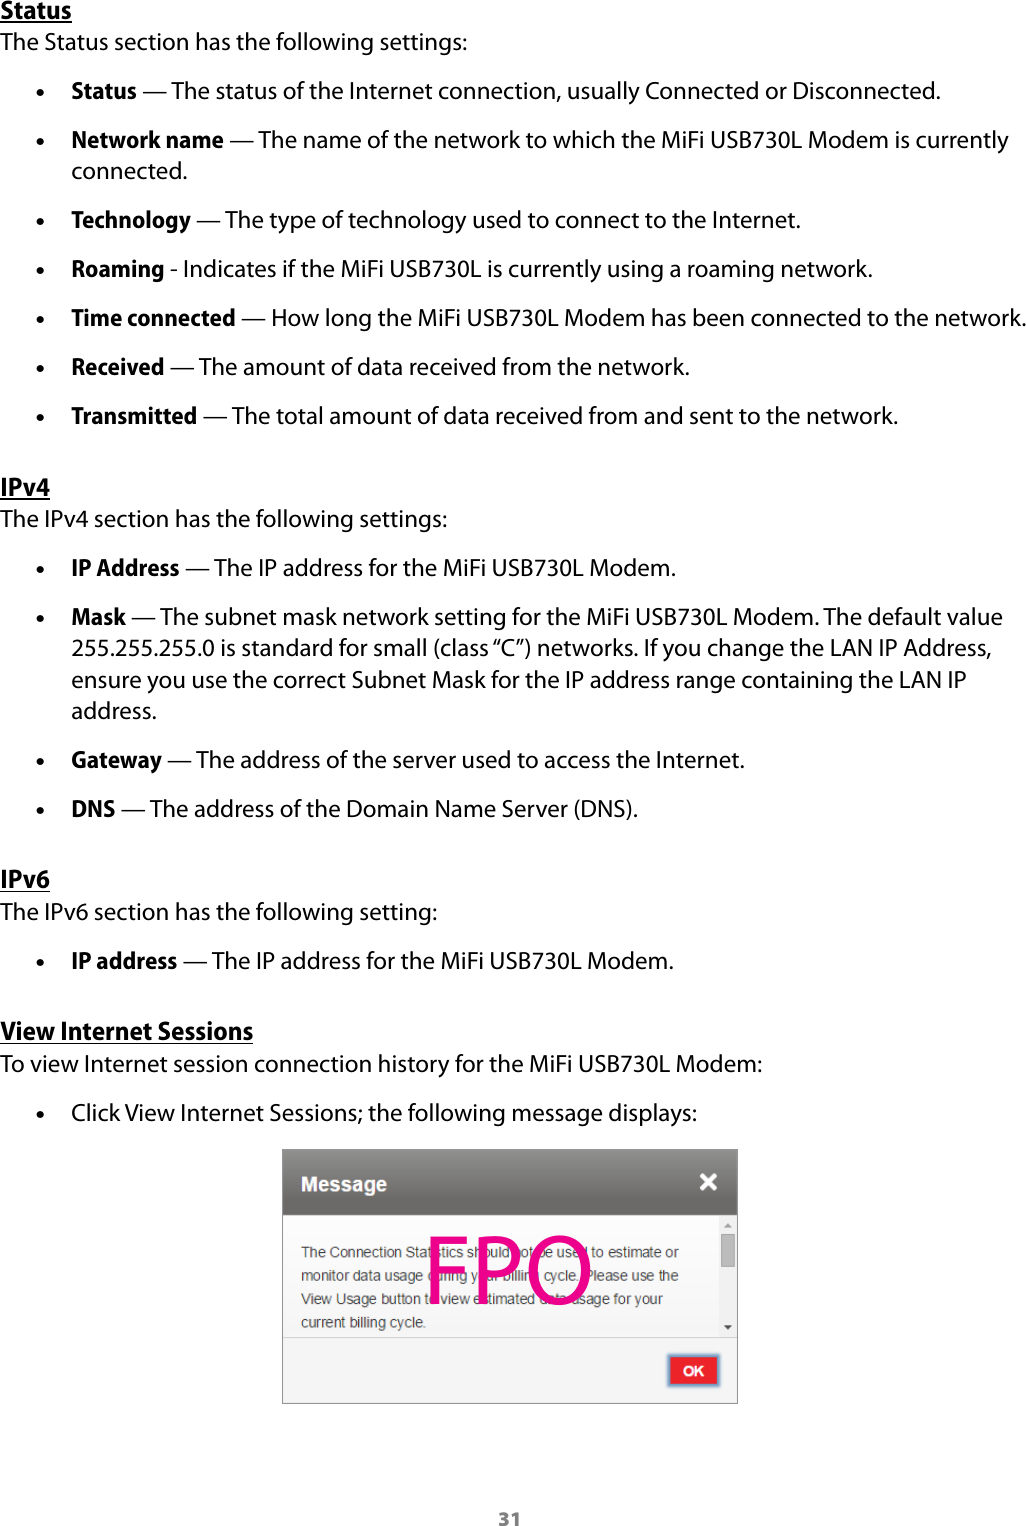 31StatusThe Status section has the following settings: •Status — The status of the Internet connection, usually Connected or Disconnected. •Network name — The name of the network to which the MiFi USB730L Modem is currently connected. •Technology — The type of technology used to connect to the Internet. •Roaming - Indicates if the MiFi USB730L is currently using a roaming network. •Time connected — How long the MiFi USB730L Modem has been connected to the network. •Received — The amount of data received from the network.  •Transmitted — The total amount of data received from and sent to the network.IPv4The IPv4 section has the following settings: •IP Address — The IP address for the MiFi USB730L Modem. •Mask — The subnet mask network setting for the MiFi USB730L Modem. The default value 255.255.255.0 is standard for small (class “C”) networks. If you change the LAN IP Address, ensure you use the correct Subnet Mask for the IP address range containing the LAN IP address. •Gateway — The address of the server used to access the Internet. •DNS — The address of the Domain Name Server (DNS).IPv6The IPv6 section has the following setting: •IP address — The IP address for the MiFi USB730L Modem.View Internet SessionsTo view Internet session connection history for the MiFi USB730L Modem: •Click View Internet Sessions; the following message displays:FPO